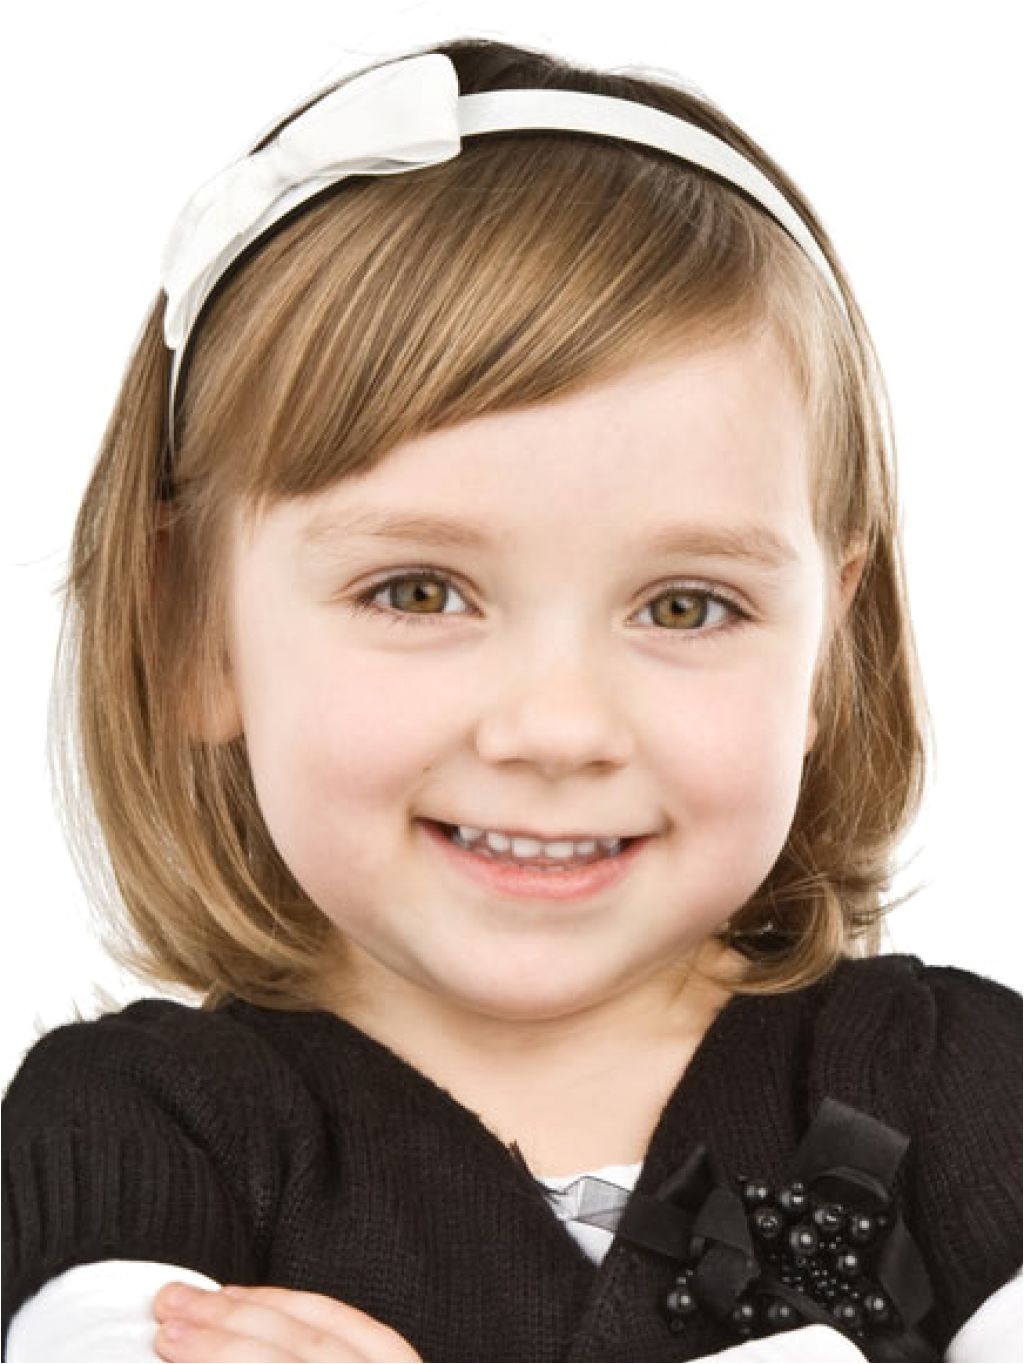 Cute Hairstyles for Baby Girls with Short Hair Image Result for Little Girls Short Haircut